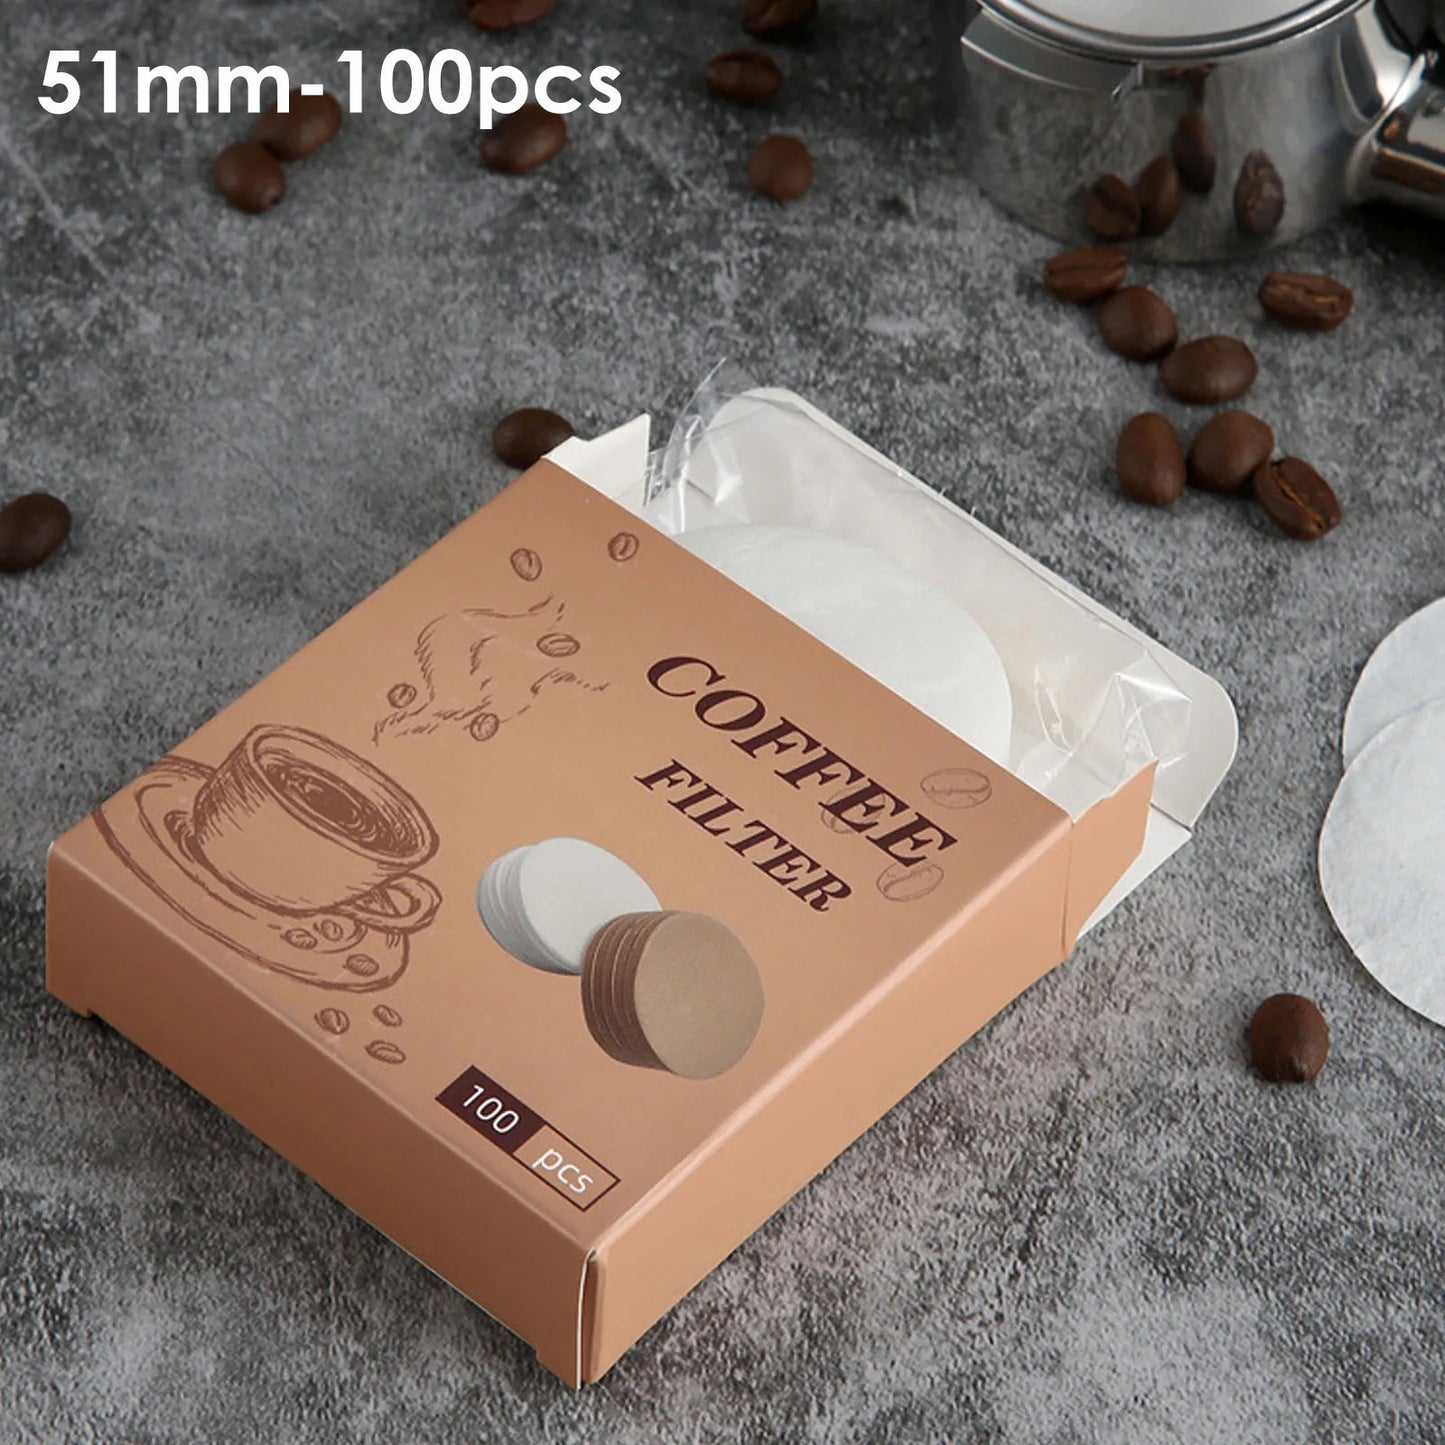 51mm/54mm/58mm Coffee Filter Paper Home Handle Special Powder Bowl Filter Paper Secondary Water Filter Paper Coffee Accessories